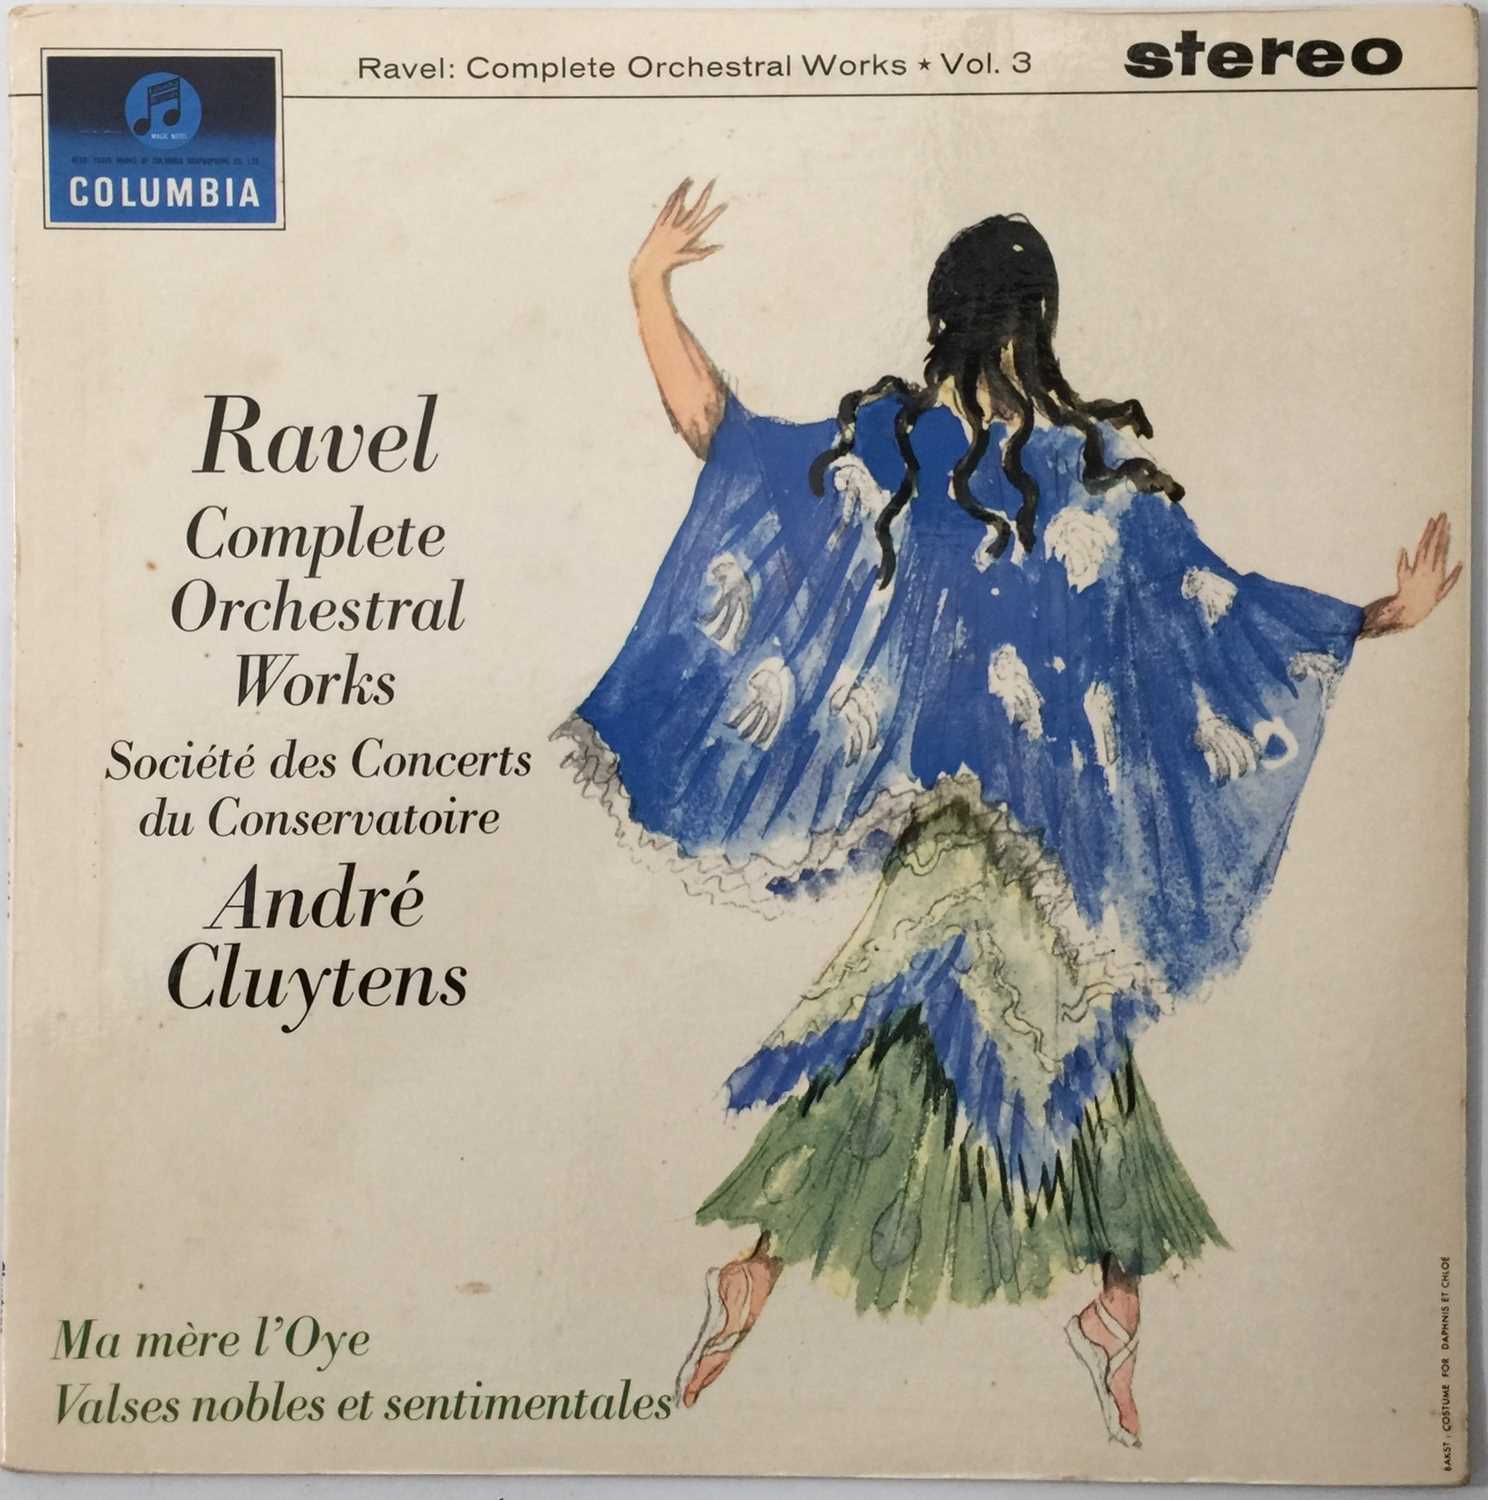 ANDRE CLUYTENS - RAVEL COMPLETE ORCHESTRAL WORKS LP (ORIGINAL UK STEREO RECORDING - COLUMBIA SAX 247 - Image 2 of 5